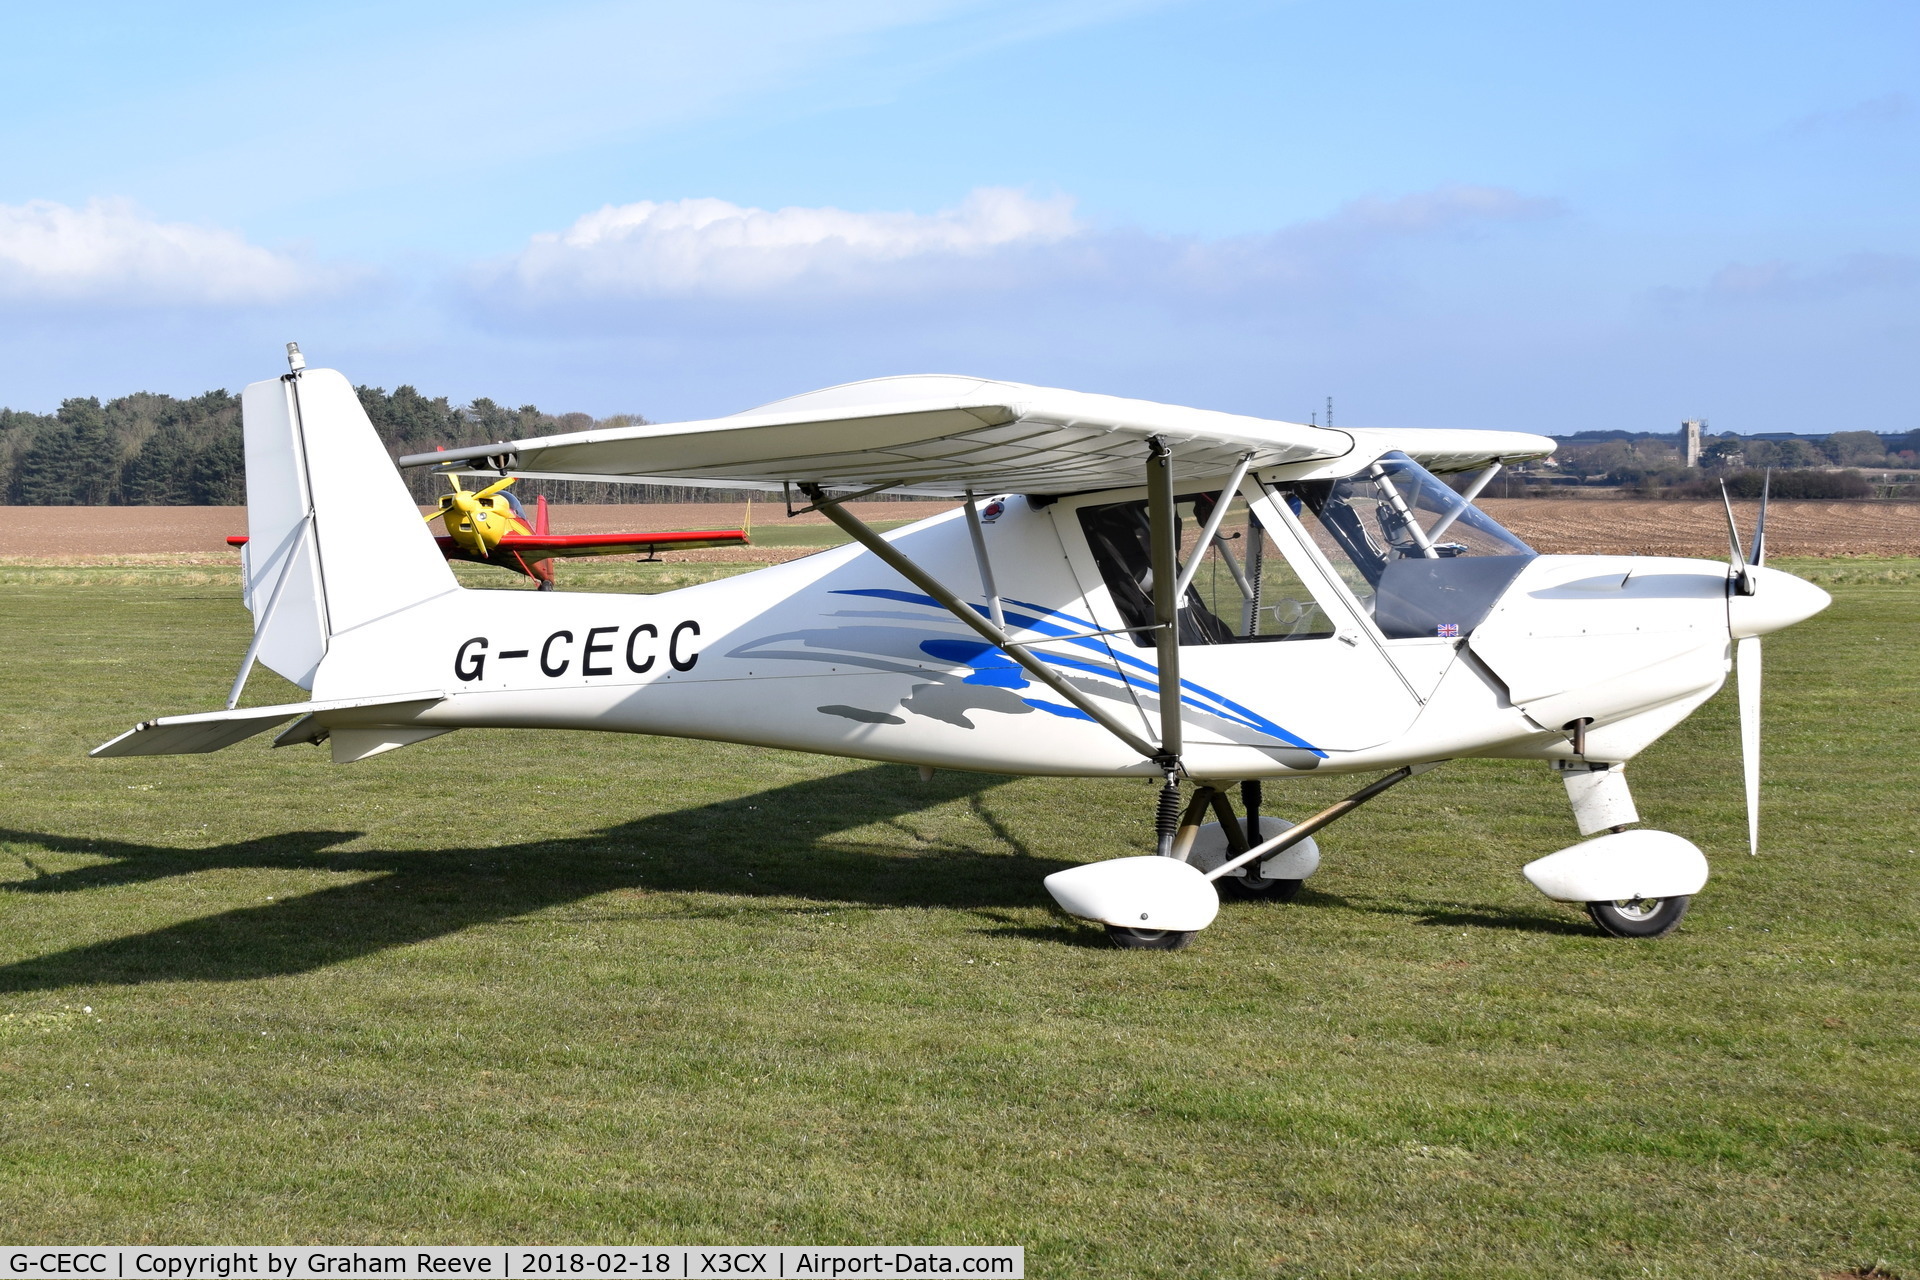 G-CECC, 2006 Comco Ikarus C42 FB80 C/N 0607-6832, Parked at Northrepps.